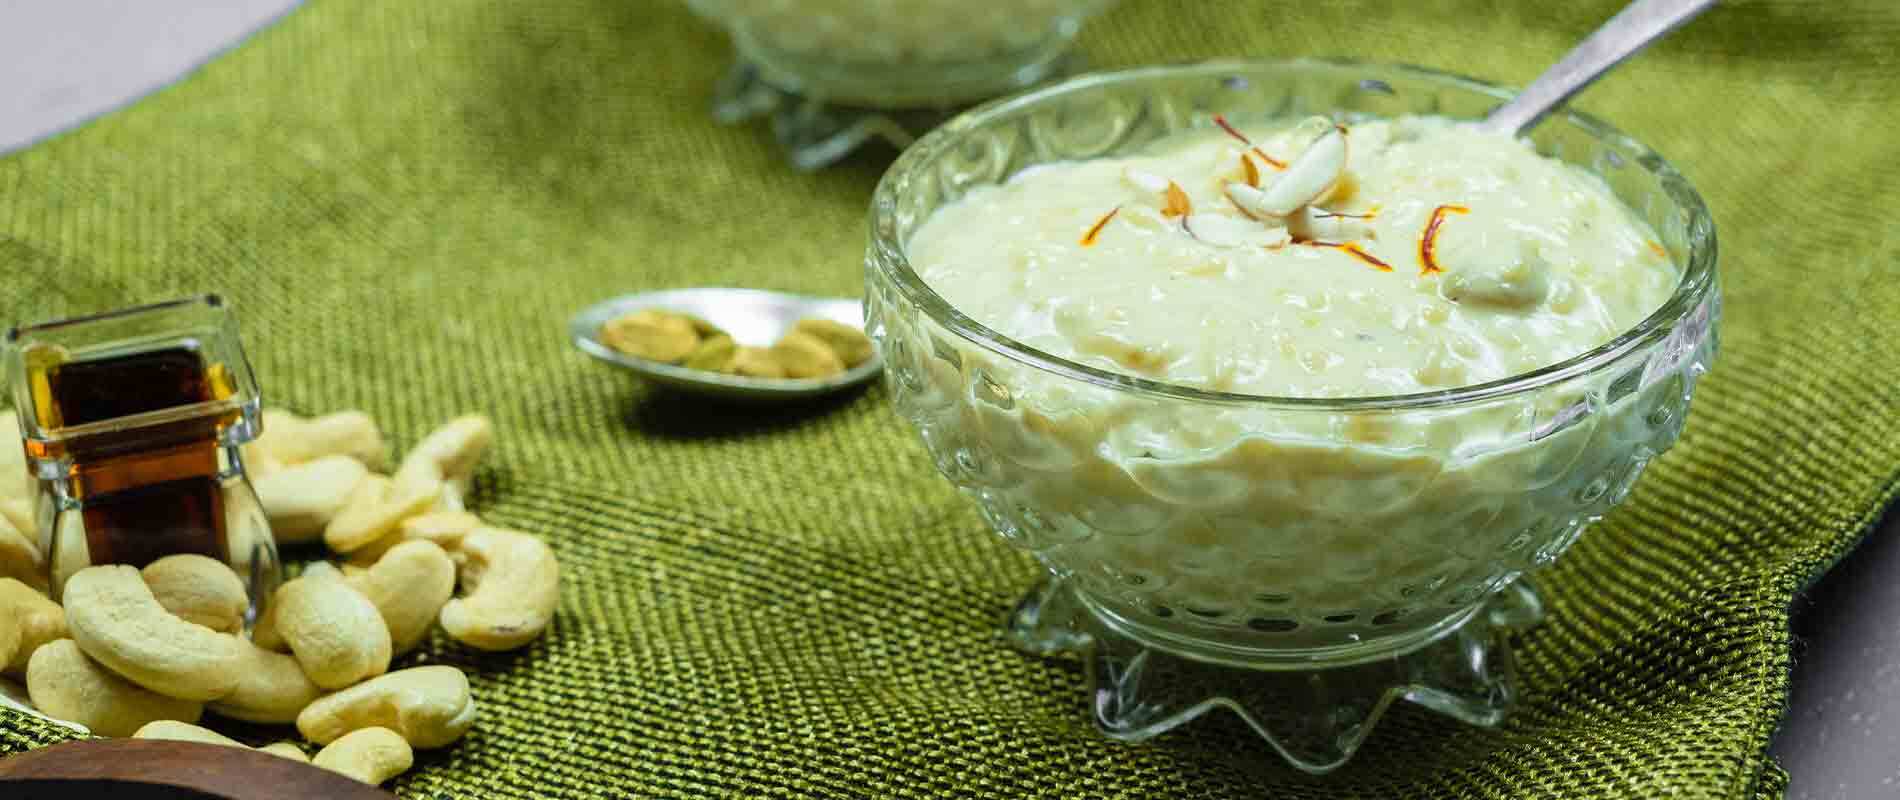 Wholesome And Vegan: Rice Kheer For A Healthier You